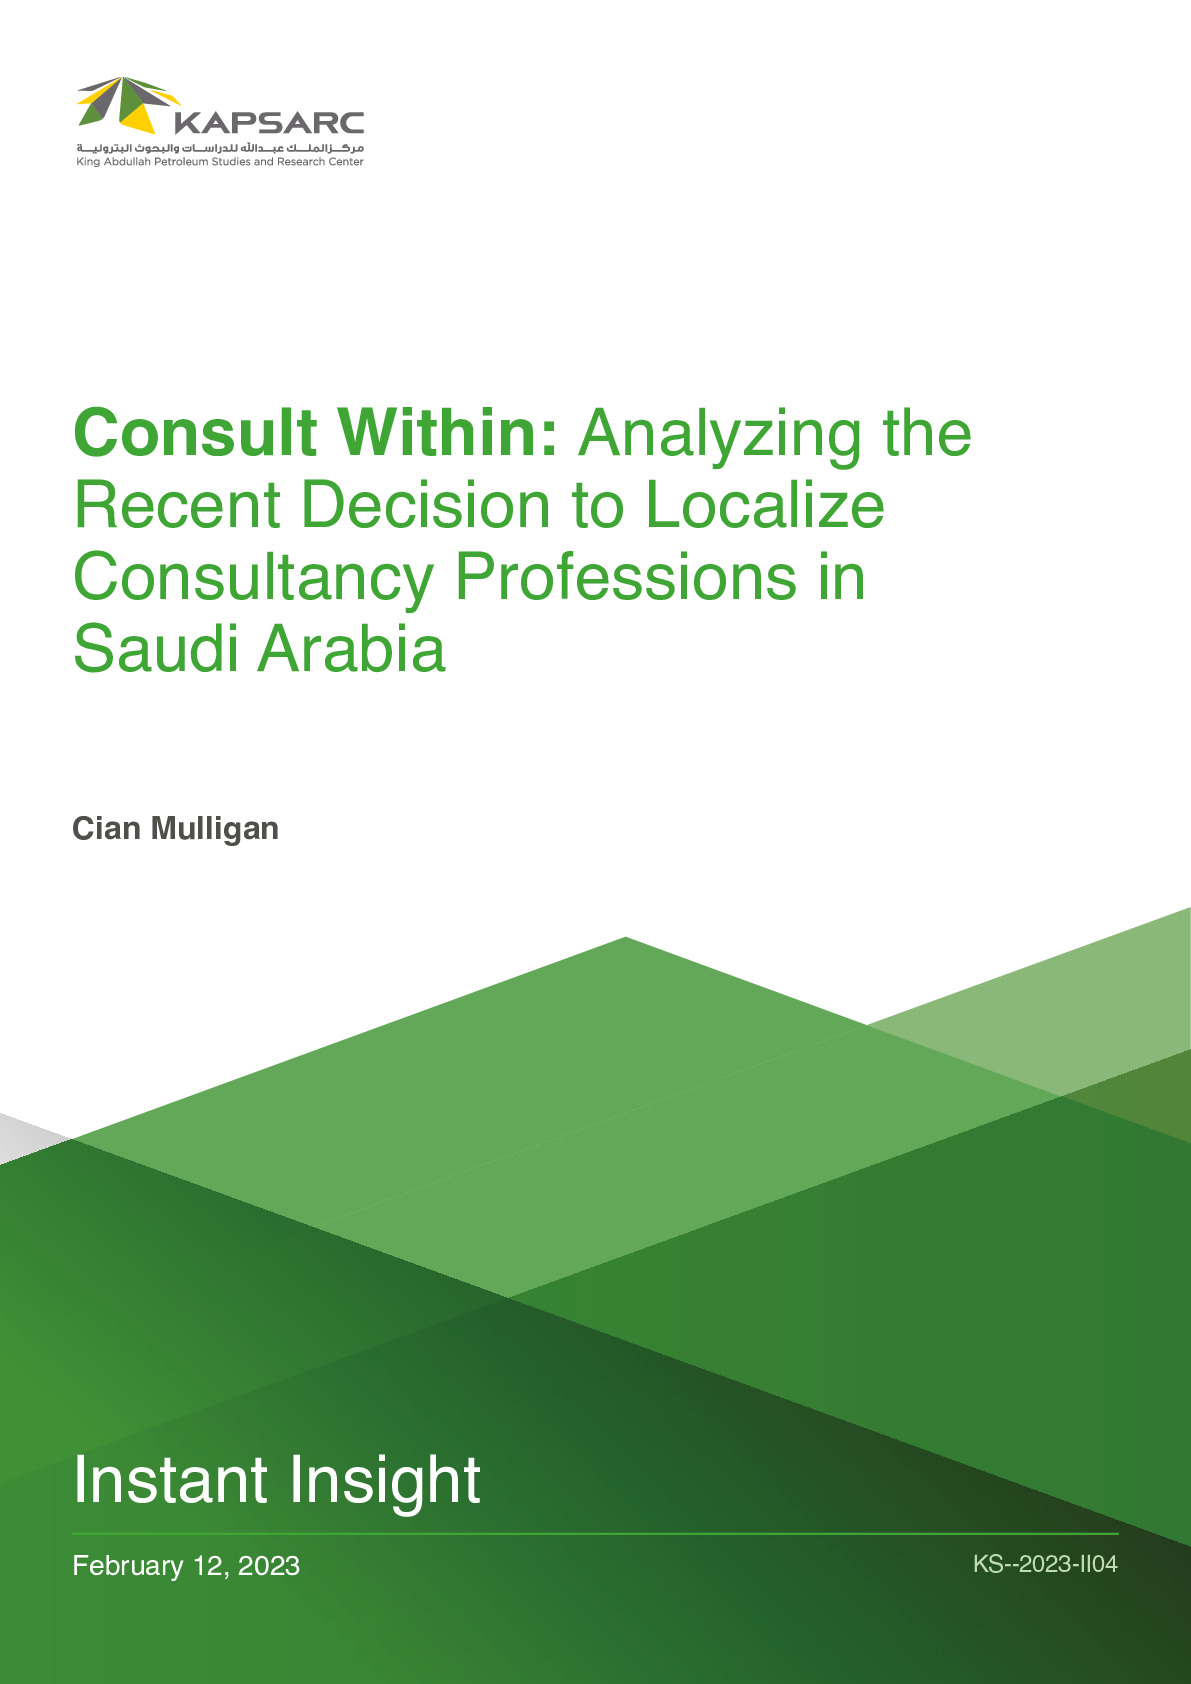 Consult Within: Analyzing the Recent Decision to Localize Consultancy Professions in Saudi Arabia